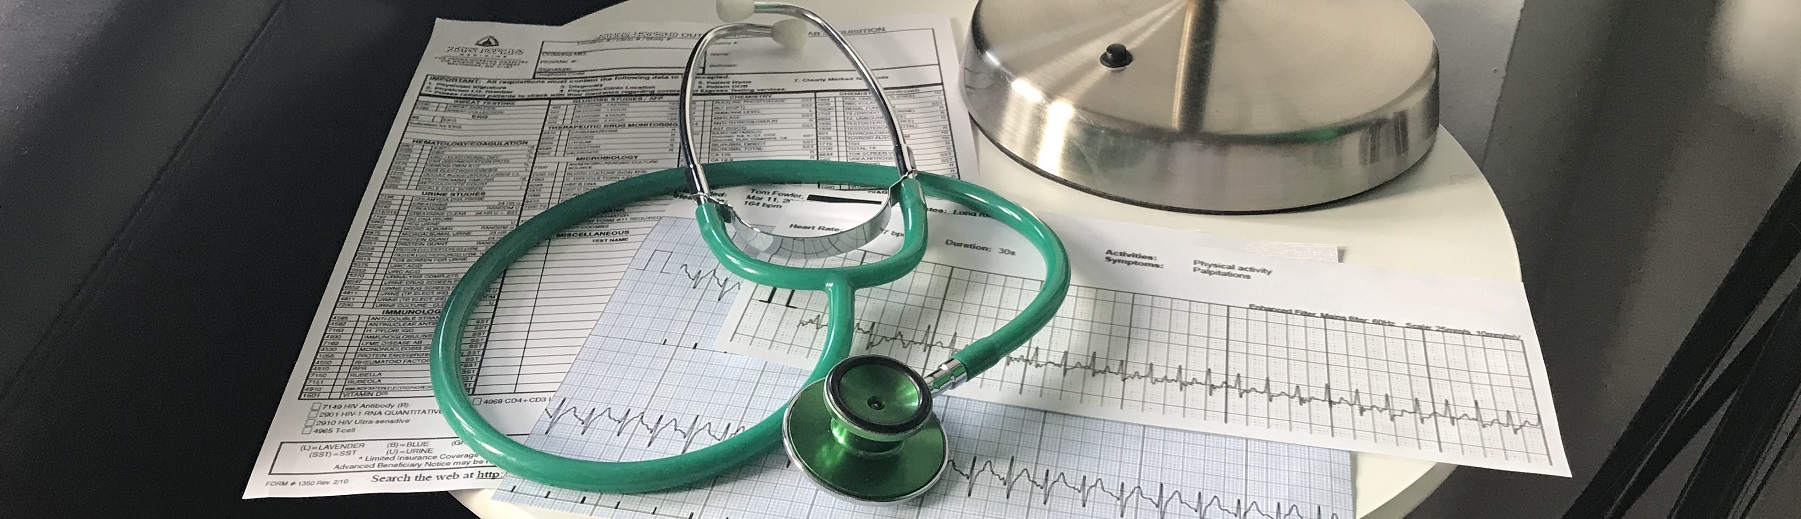 A picture of a stethoscope